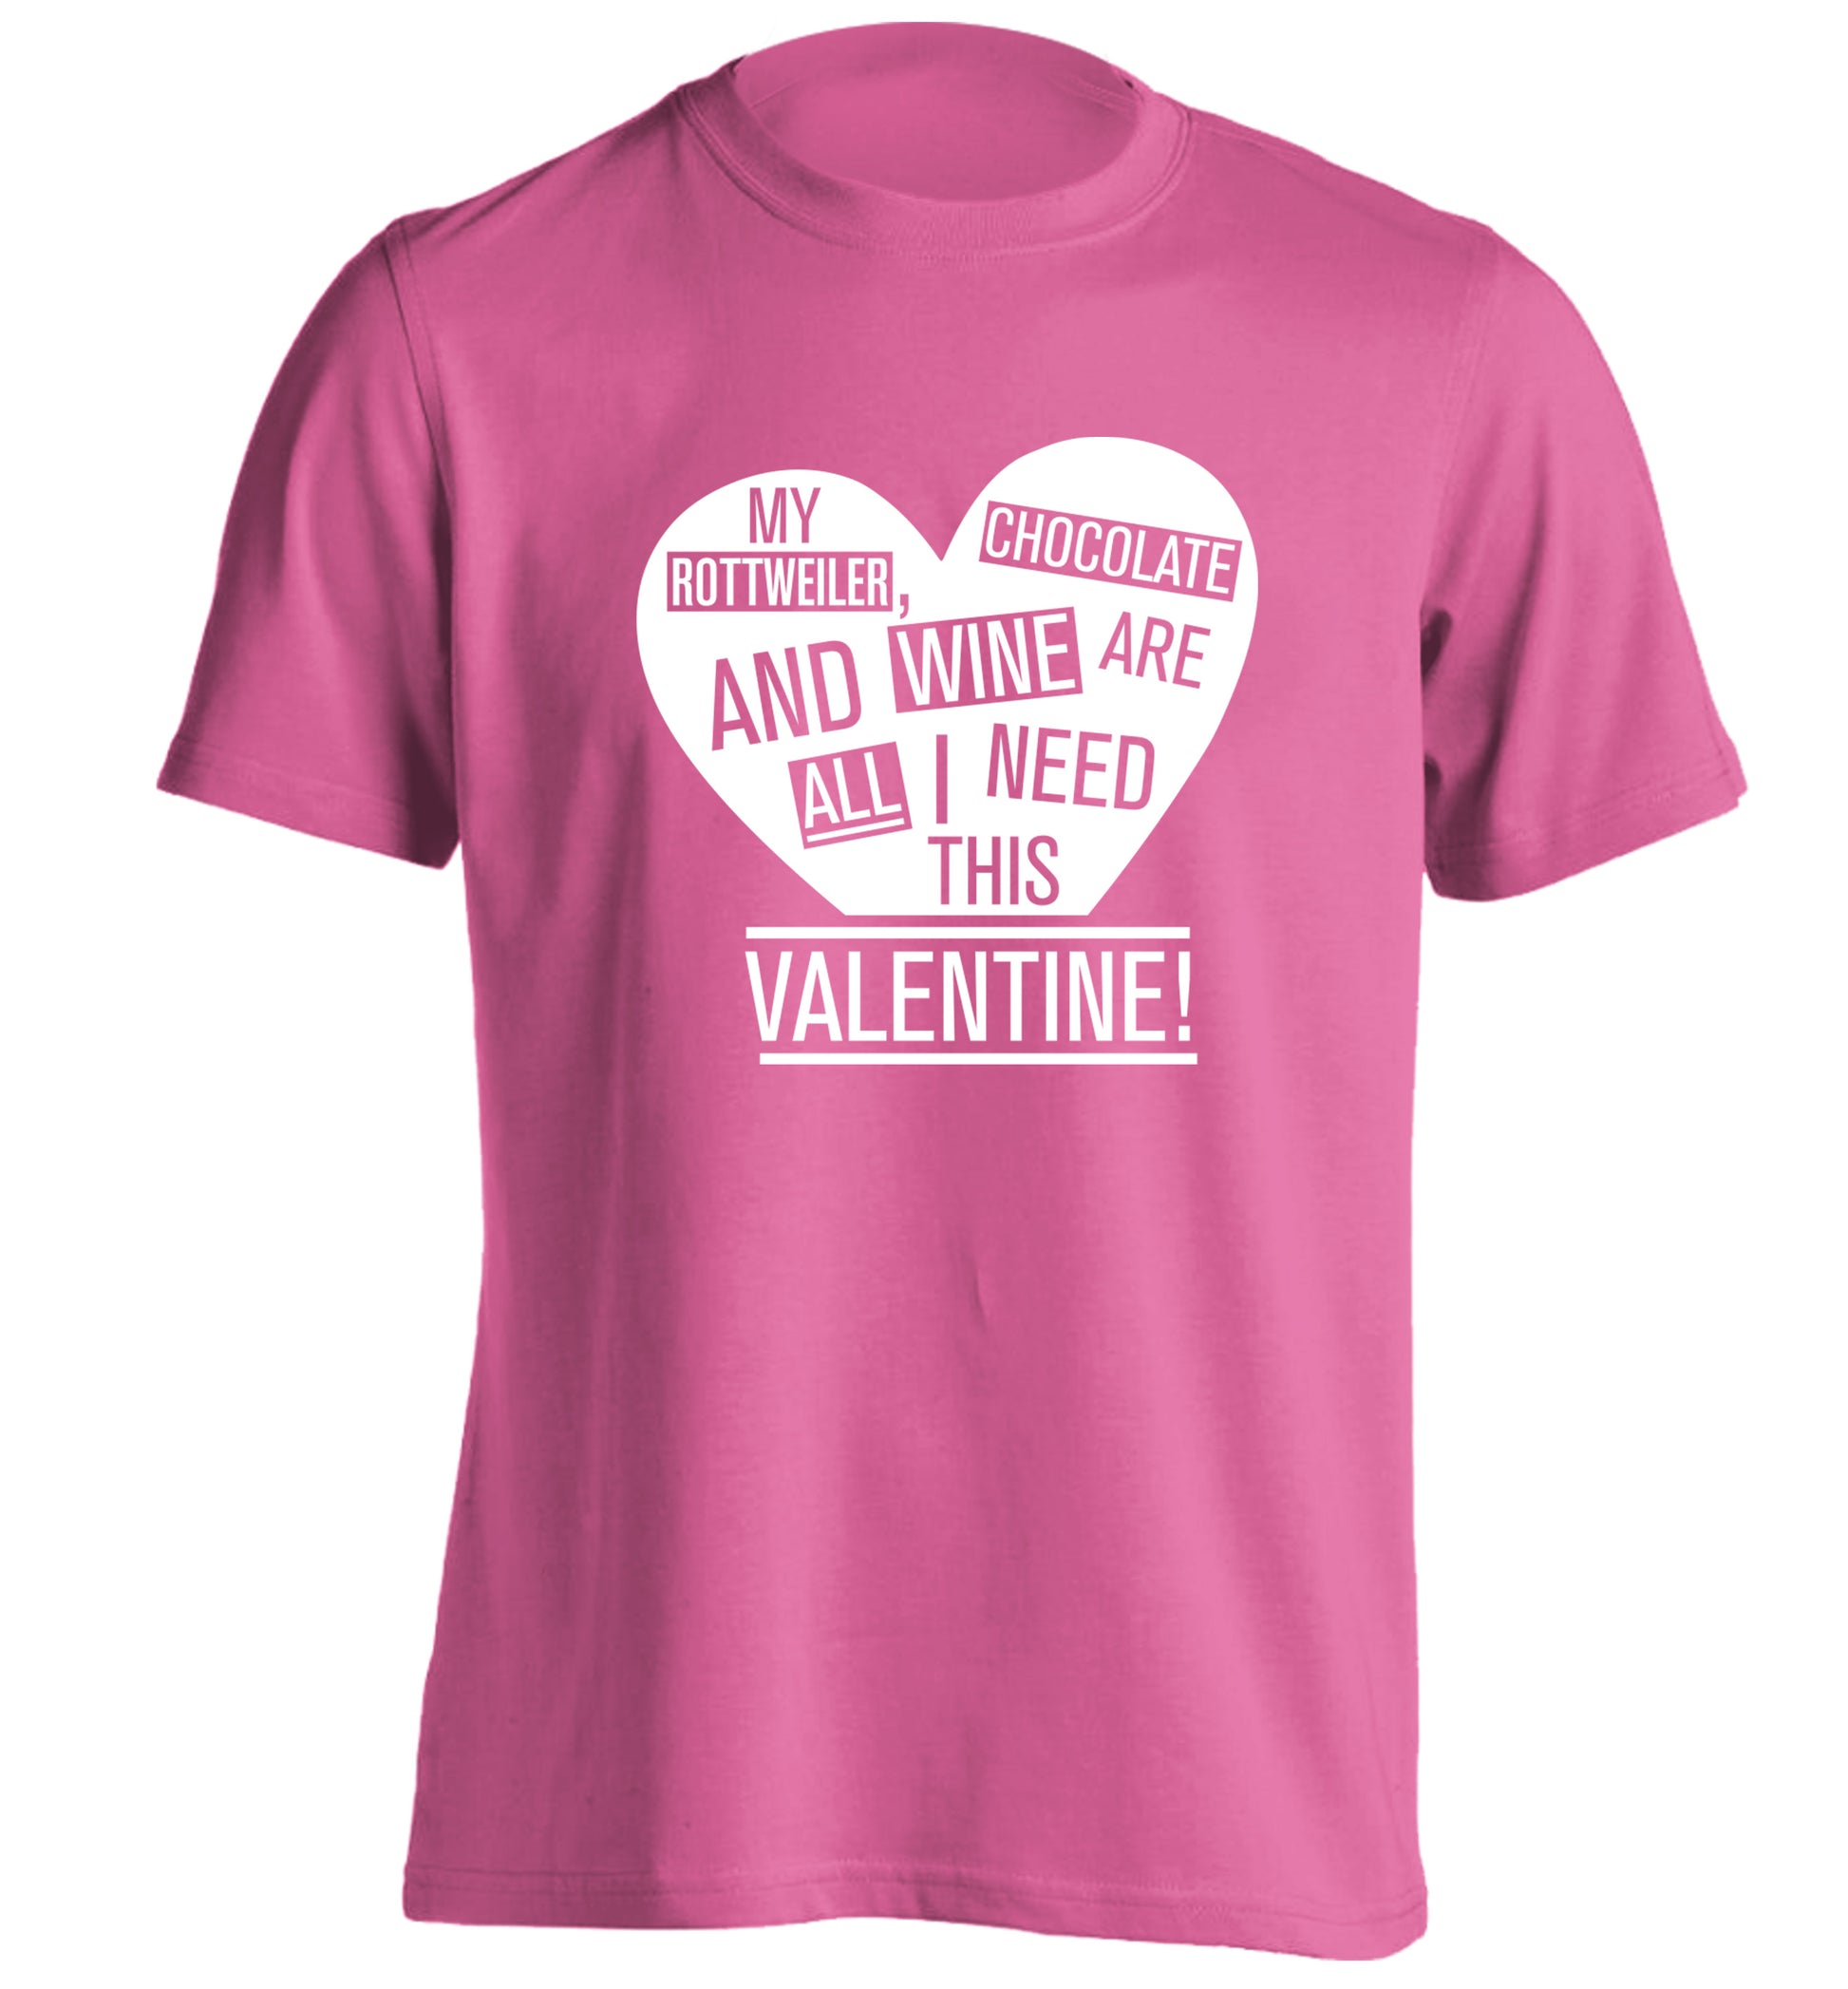 My rottweiler, chocolate and wine are all I need this valentine! adults unisex pink Tshirt 2XL